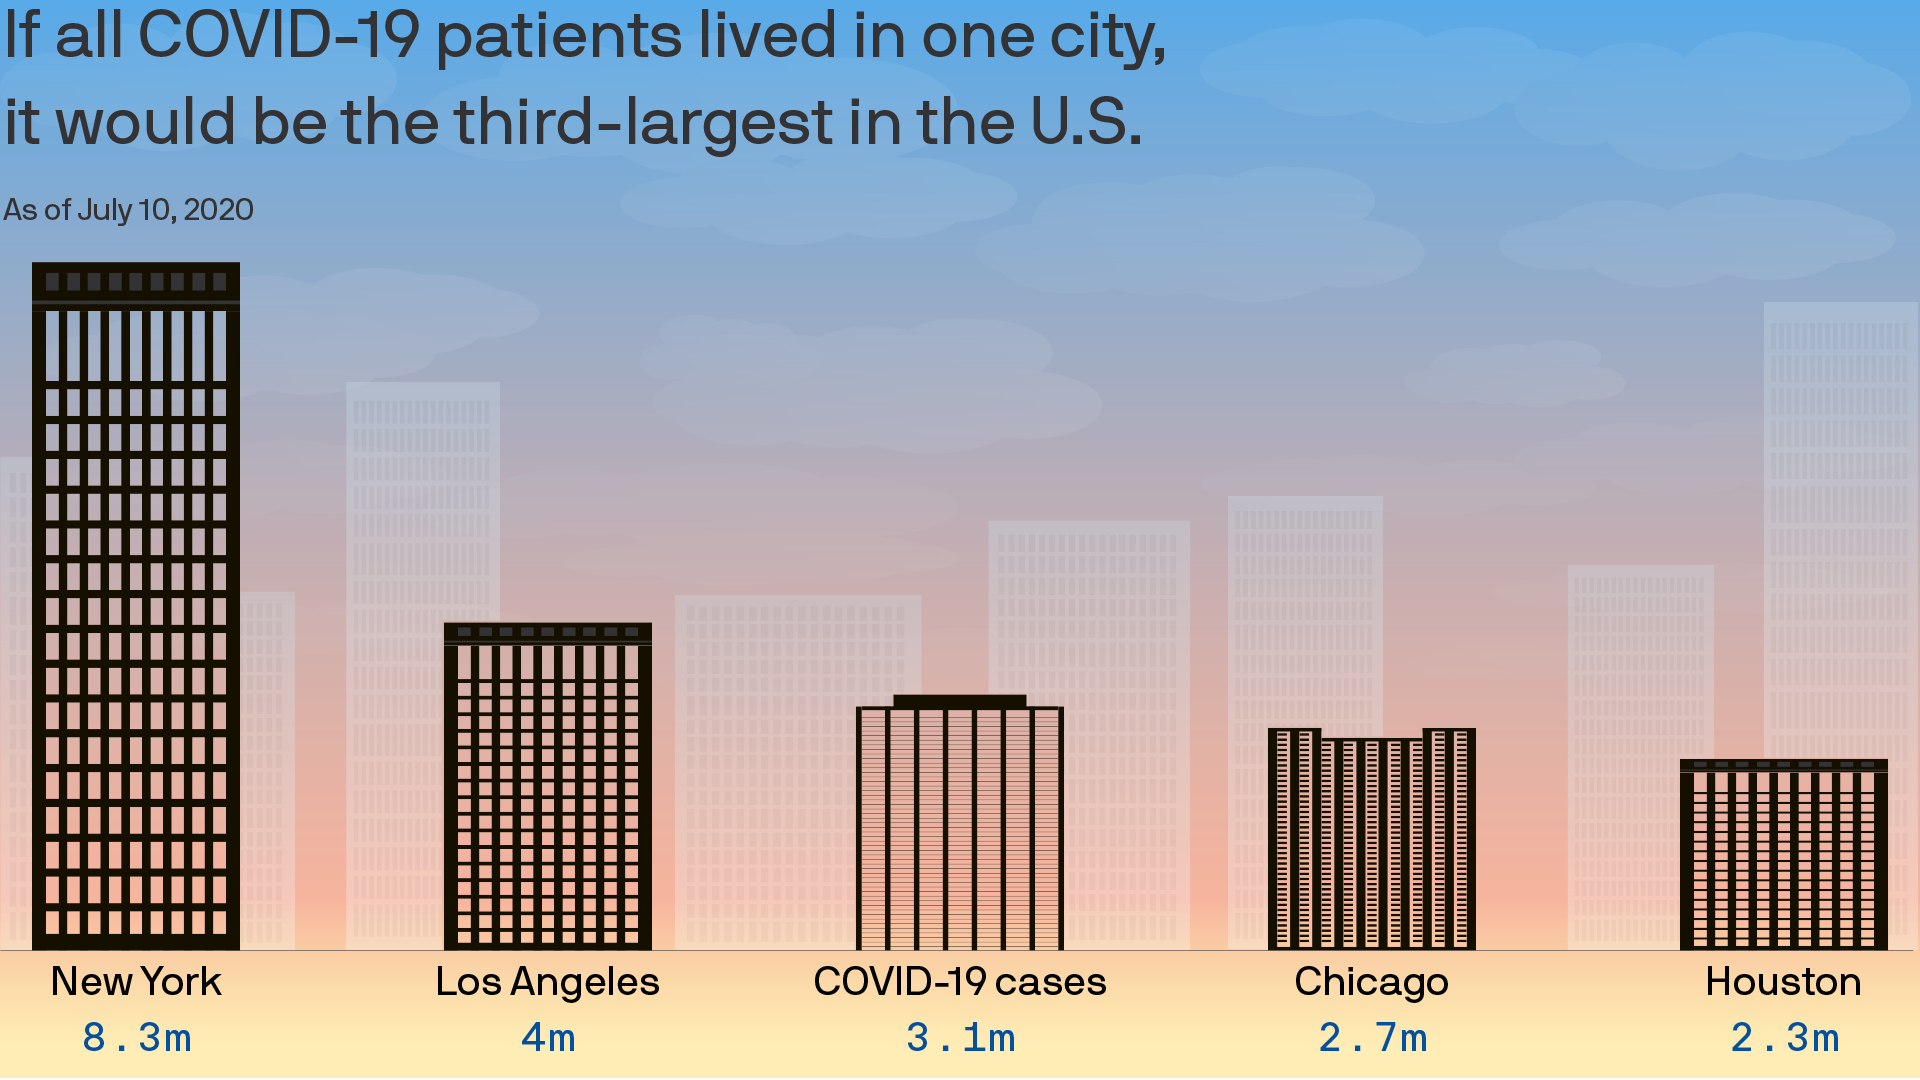 Graphic comparing the population of all U.S. COVID-19 patients to other major U.S. cities